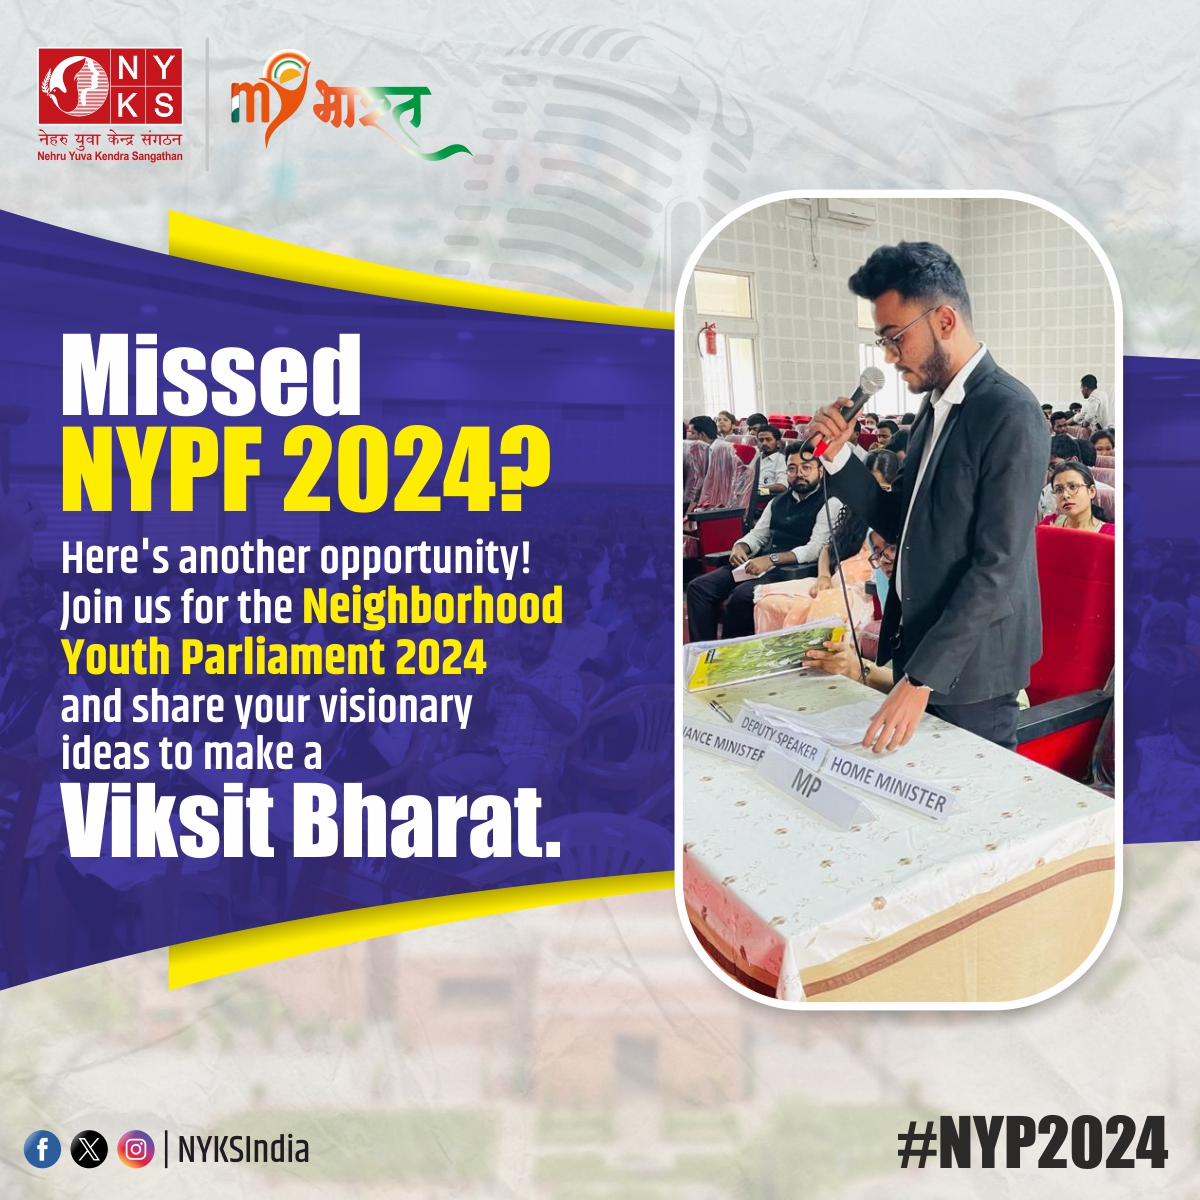 Didn't make it to NYPF 2024? Don't worry, you've got another chance! Join us for Neighborhood Youth Parliament 2024 and be a part of shaping a visionary future for a Viksit Bharat. To Participate Contact Your Nearest NYK District Center. #YouthEmpowerment #NYP2024 #NYKS